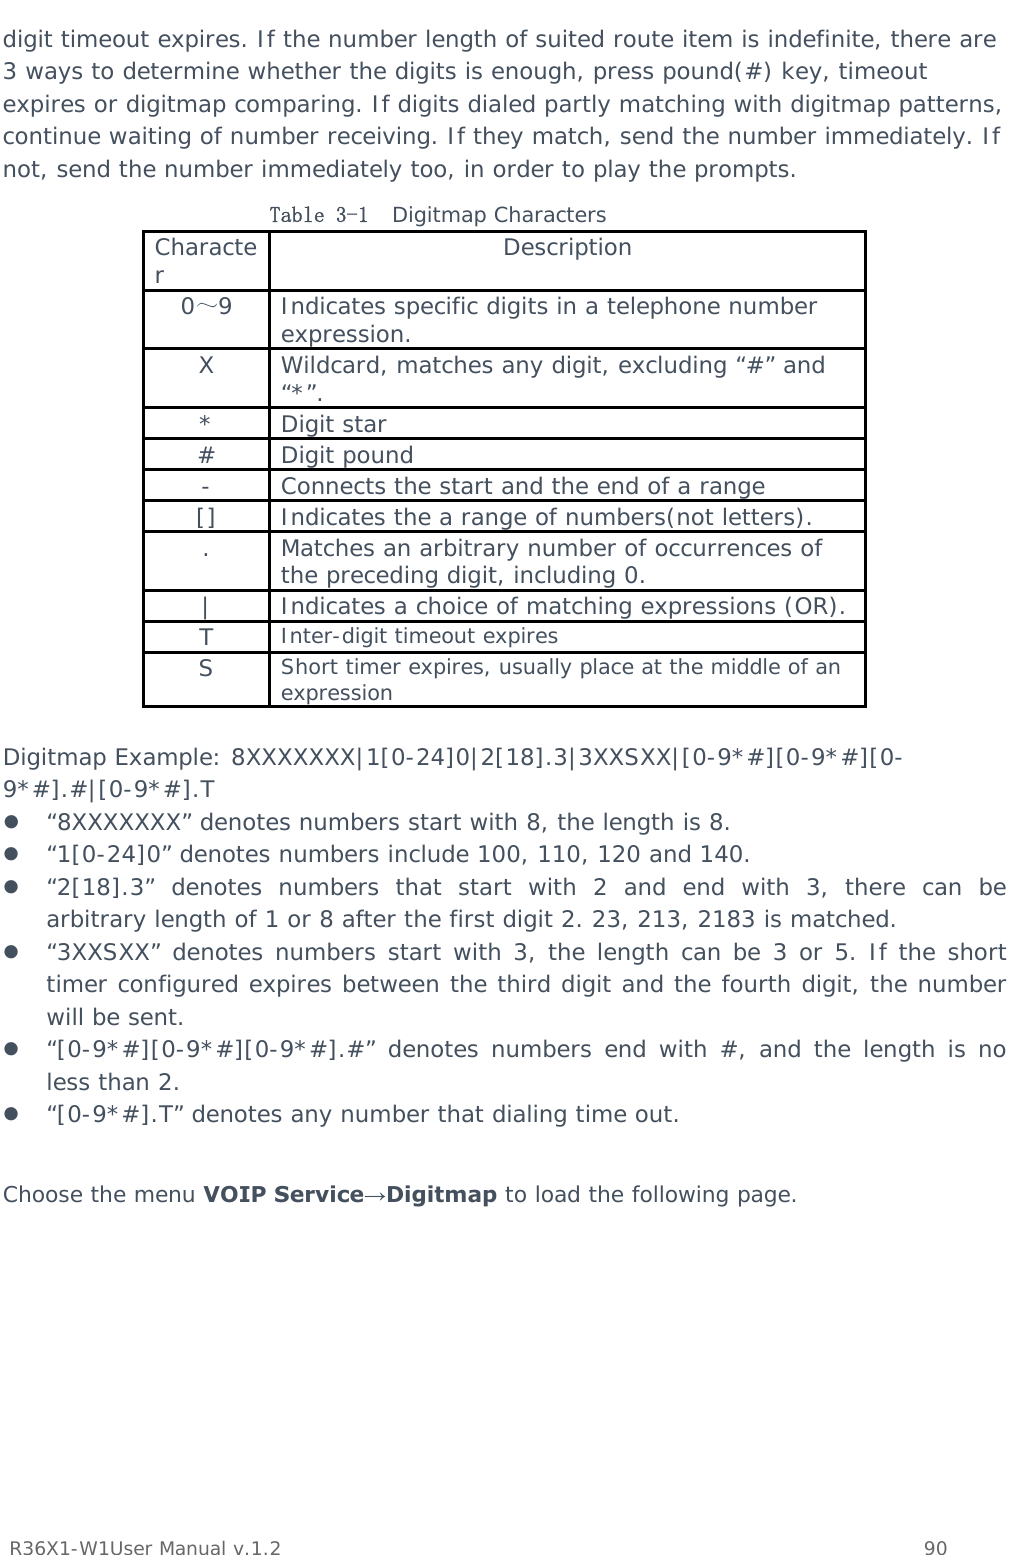           R36X1-W1User Manual v.1.2    90  digit timeout expires. If the number length of suited route item is indefinite, there are 3 ways to determine whether the digits is enough, press pound(#) key, timeout expires or digitmap comparing. If digits dialed partly matching with digitmap patterns, continue waiting of number receiving. If they match, send the number immediately. If not, send the number immediately too, in order to play the prompts. Table 3-1 Digitmap Characters Character  Description ～0 9  Indicates specific digits in a telephone number expression. X  Wildcard, matches any digit, excluding “#” and “*”. * Digit star # Digit pound -  Connects the start and the end of a range []  Indicates the a range of numbers(not letters). .  Matches an arbitrary number of occurrences of the preceding digit, including 0. |  Indicates a choice of matching expressions (OR). T  Inter-digit timeout expiresS  Short timer expires, usually place at the middle of an expression  Digitmap Example: 8XXXXXXX|1[0-24]0|2[18].3|3XXSXX|[0-9*#][0-9*#][0-9*#].#|[0-9*#].T  “8XXXXXXX” denotes numbers start with 8, the length is 8.  “1[0-24]0” denotes numbers include 100, 110, 120 and 140.  “2[18].3” denotes numbers that start with 2 and end with 3, there can be arbitrary length of 1 or 8 after the first digit 2. 23, 213, 2183 is matched.  “3XXSXX” denotes numbers start with 3, the length can be 3 or 5. If the short timer configured expires between the third digit and the fourth digit, the number will be sent.  “[0-9*#][0-9*#][0-9*#].#” denotes numbers end with #, and the length is no less than 2.  “[0-9*#].T” denotes any number that dialing time out.  Choose the menu VOIP Service→Digitmap to load the following page. 